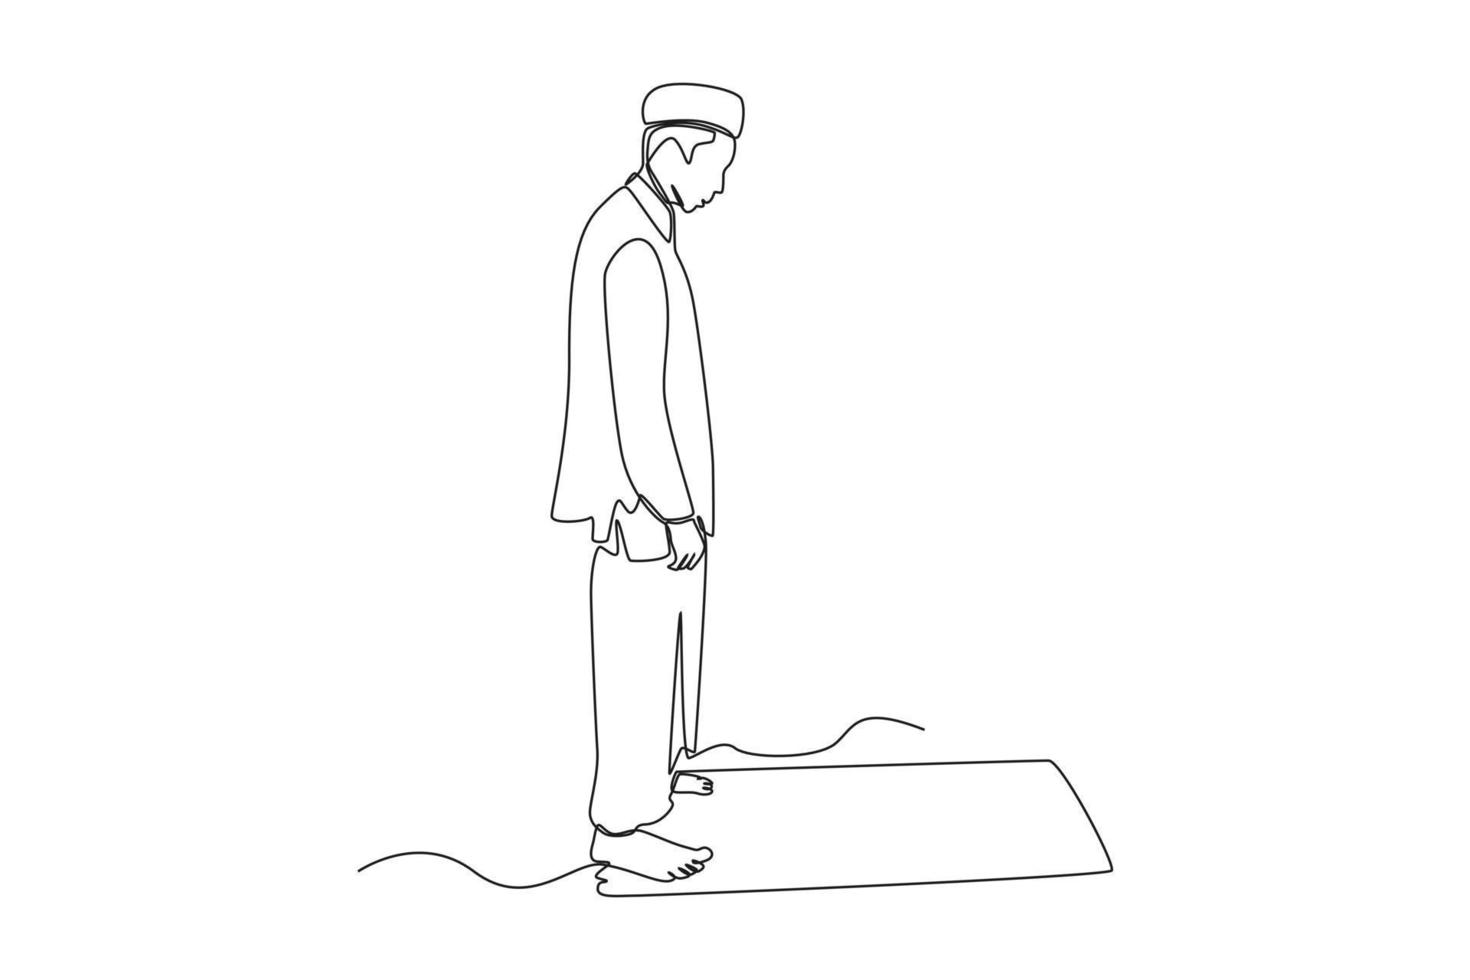 Single one line drawing standing prayer movement. Salah Prayer for Men. Prayer movement concept for muslims. Continuous line draw design graphic vector illustration.